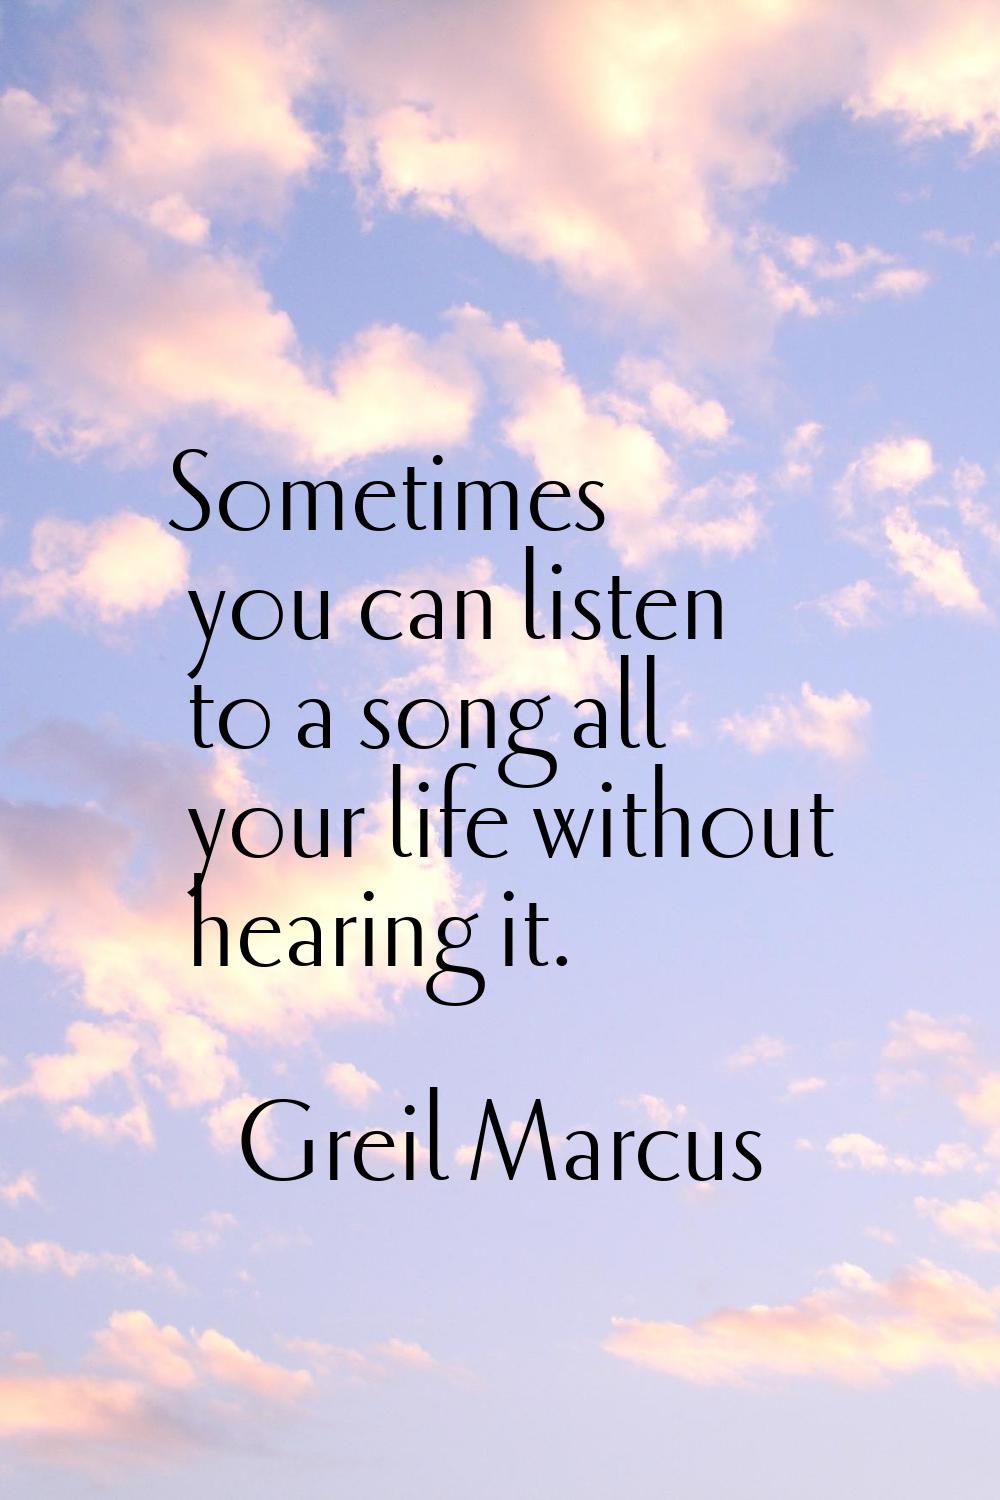 Sometimes you can listen to a song all your life without hearing it.